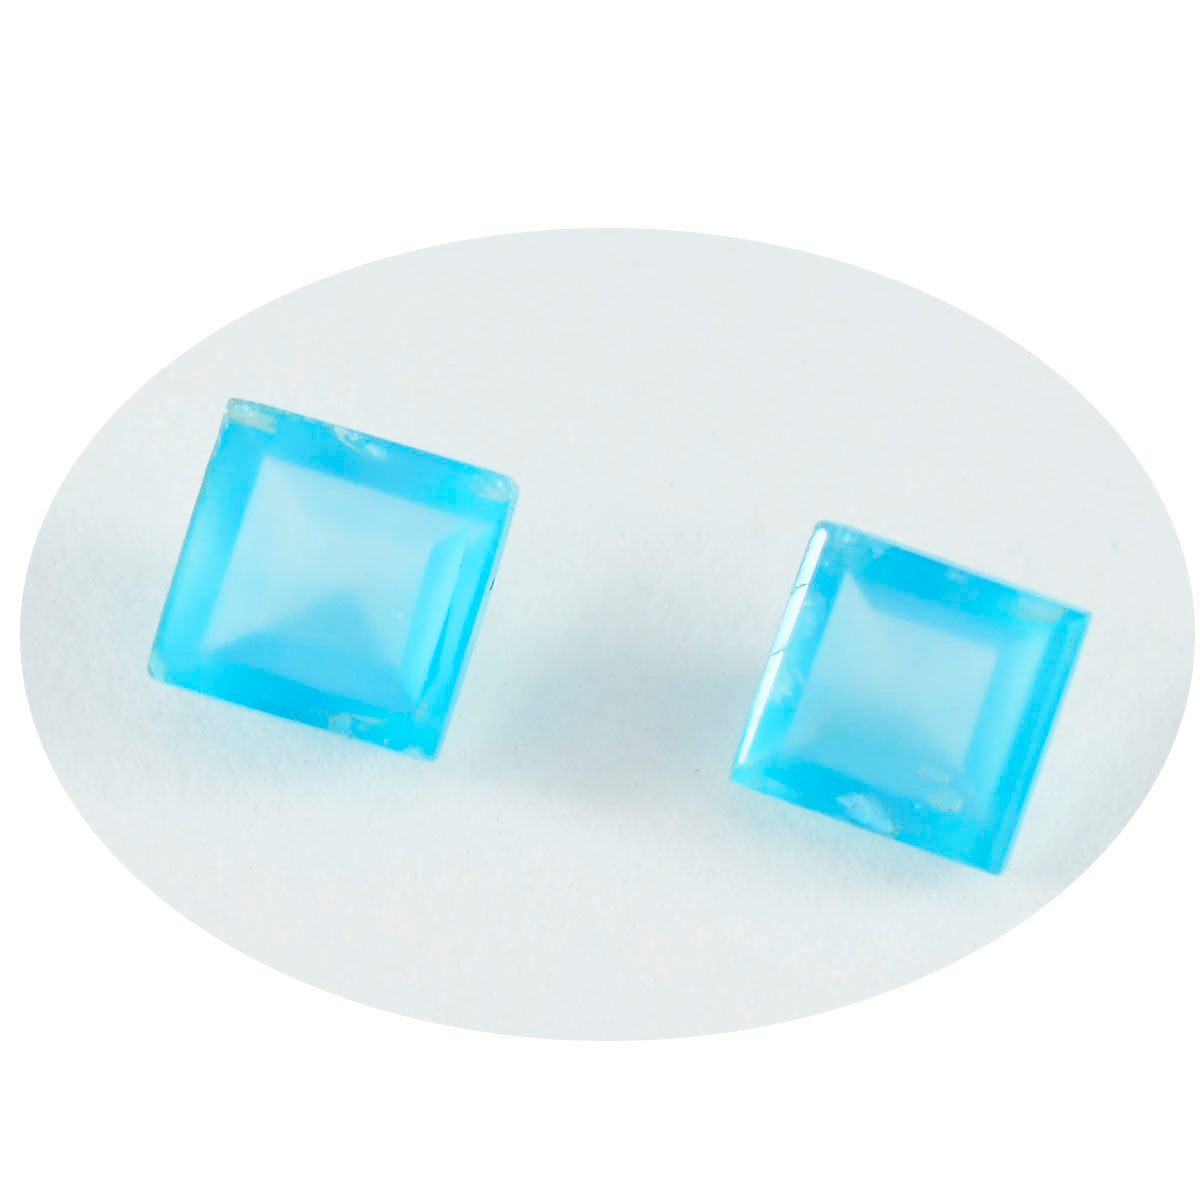 Riyogems 1PC Natural Blue Chalcedony Faceted 10x10 mm Square Shape beautiful Quality Gem